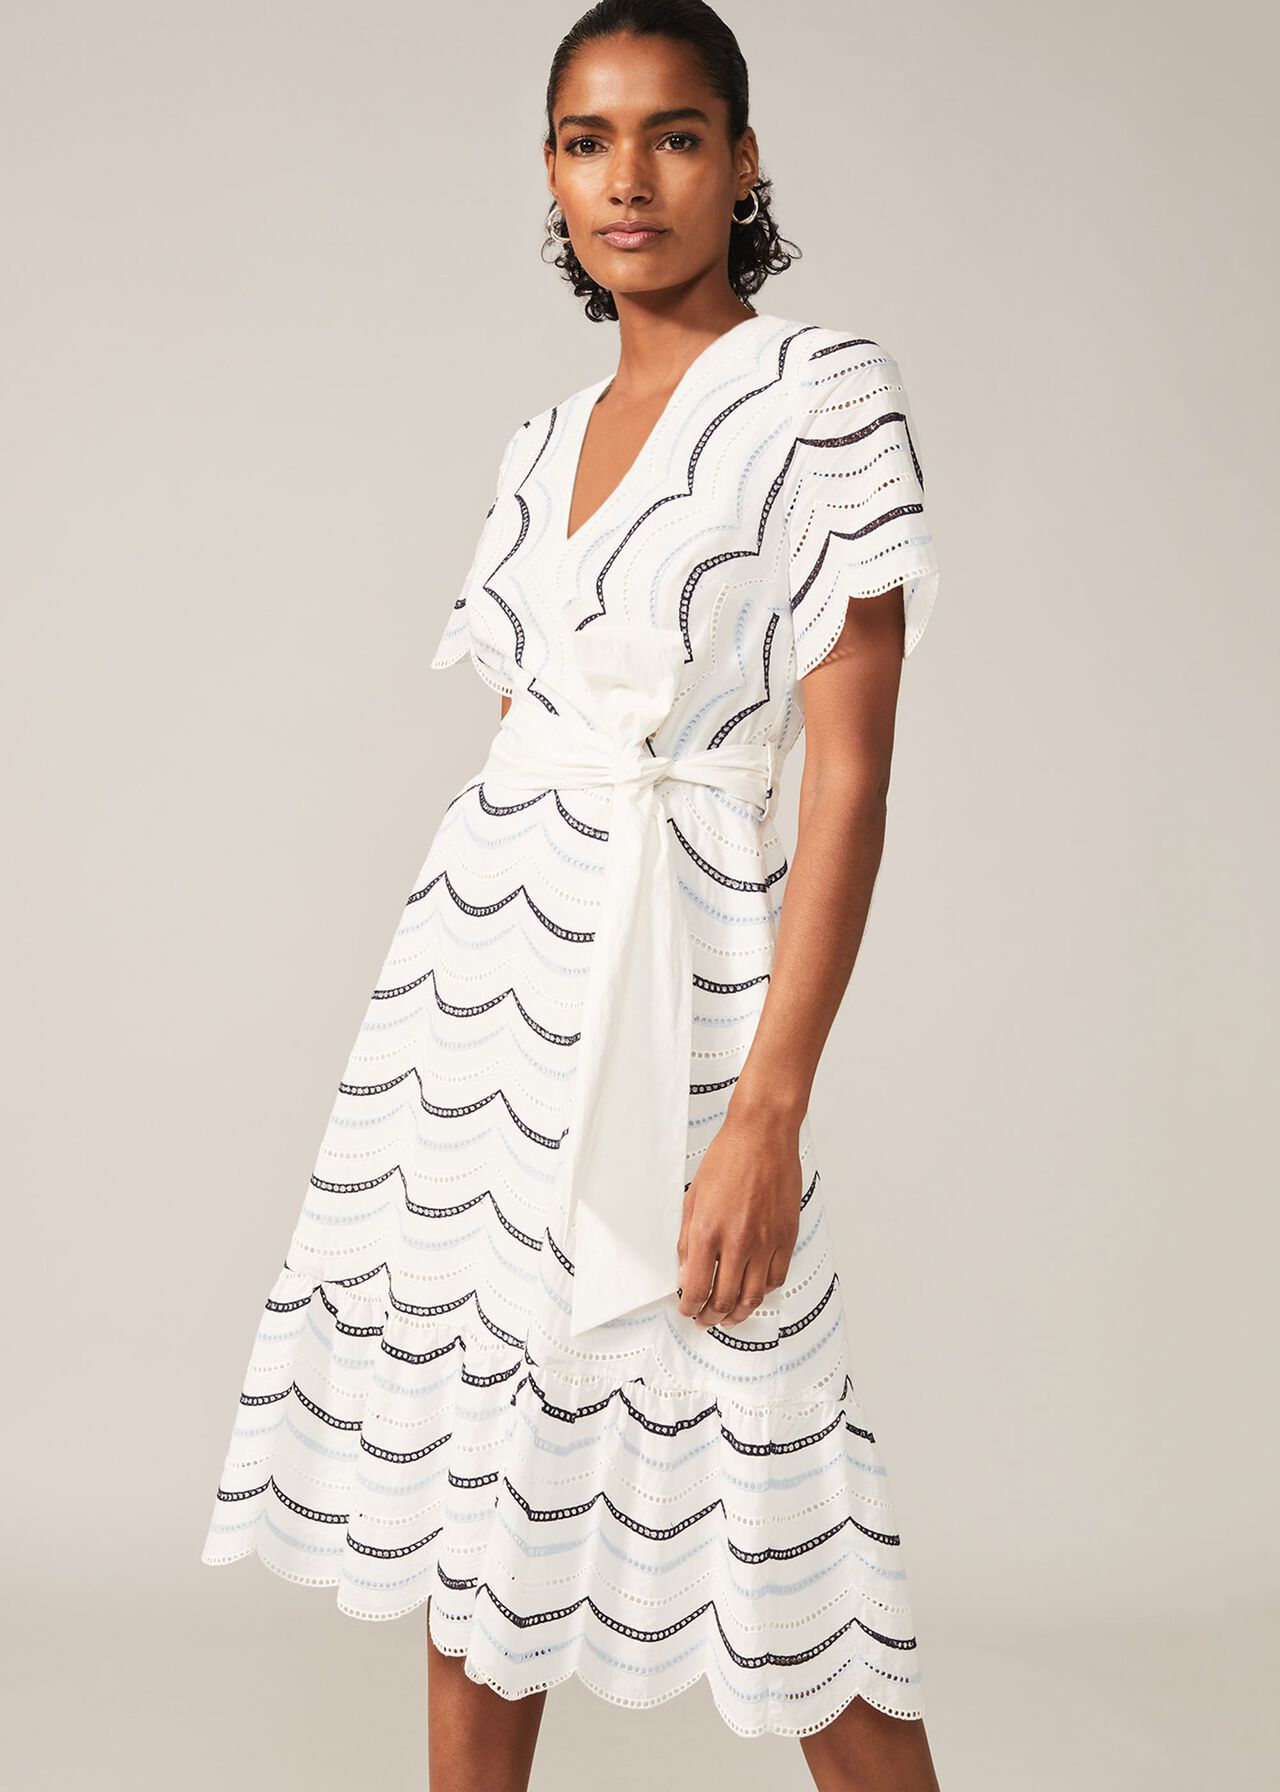 Amelina Cotton Broderie Anglaise Dress | Phase Eight